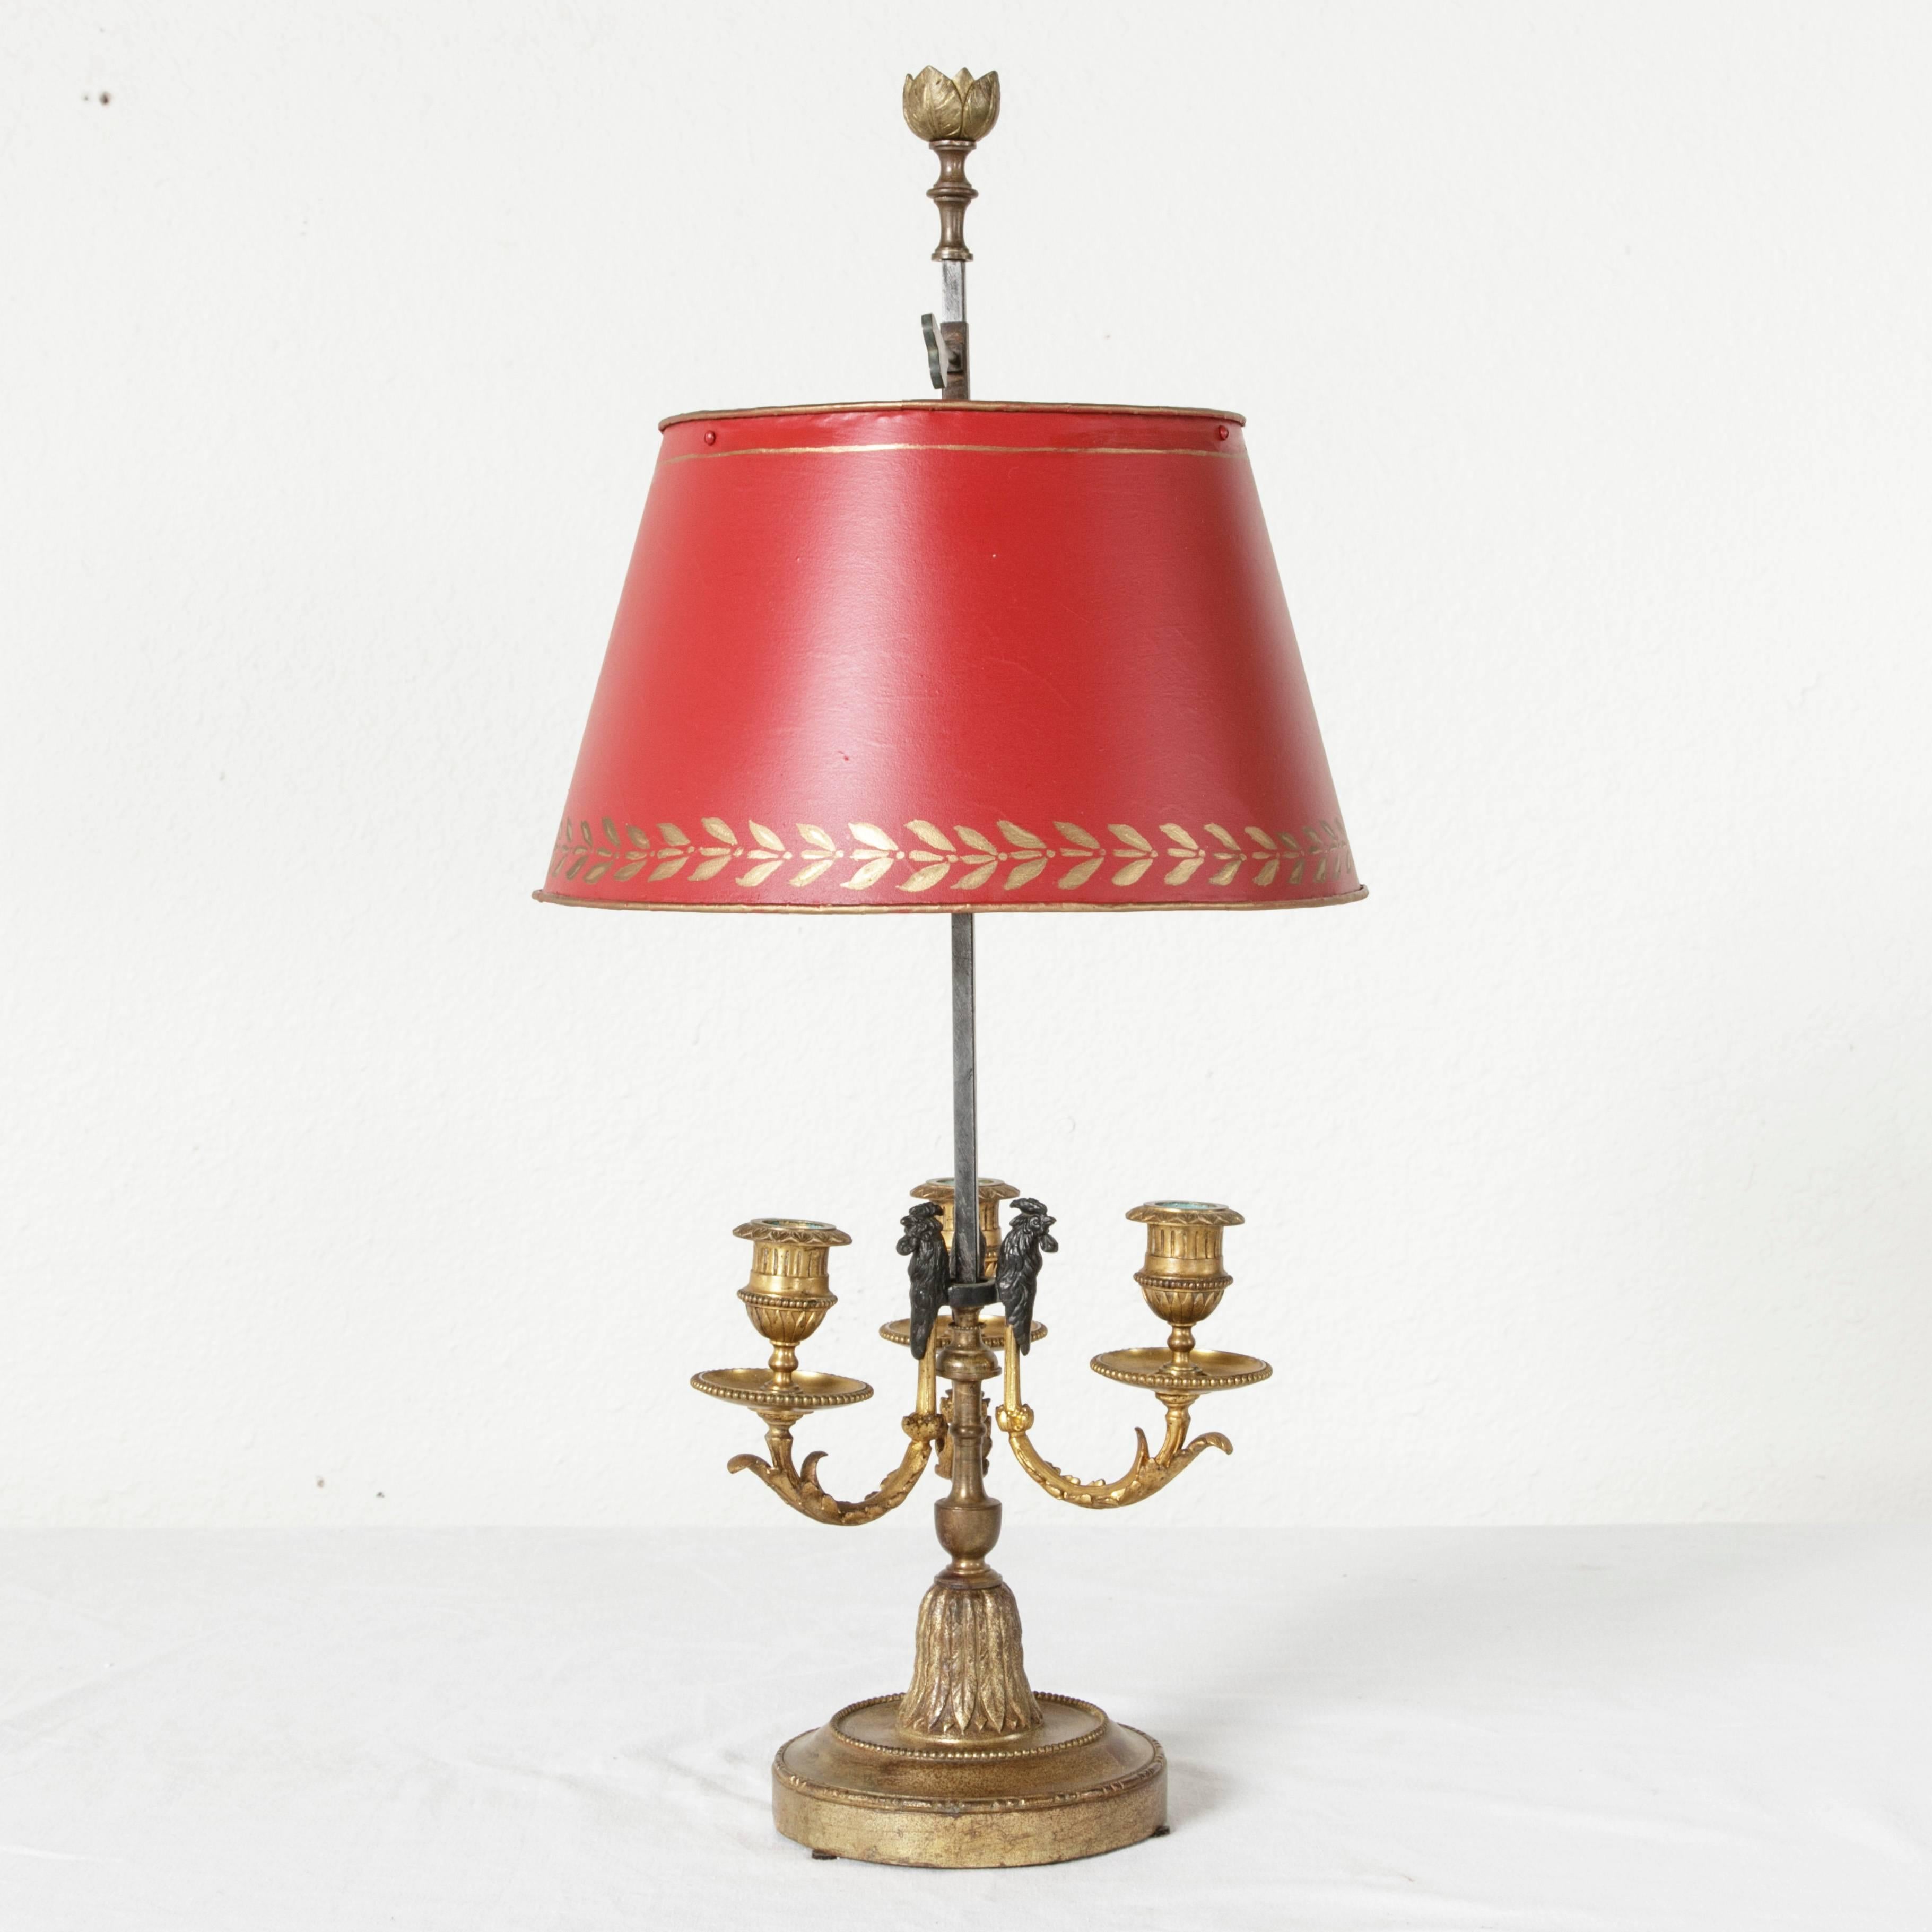 This superb lamp bouillotte features bronze roosters surrounding its central pillar, with an intricate bronze doré base and three arms for candles. The tole painted red and gold shade is on an adjustable square edged column topped with a finial of